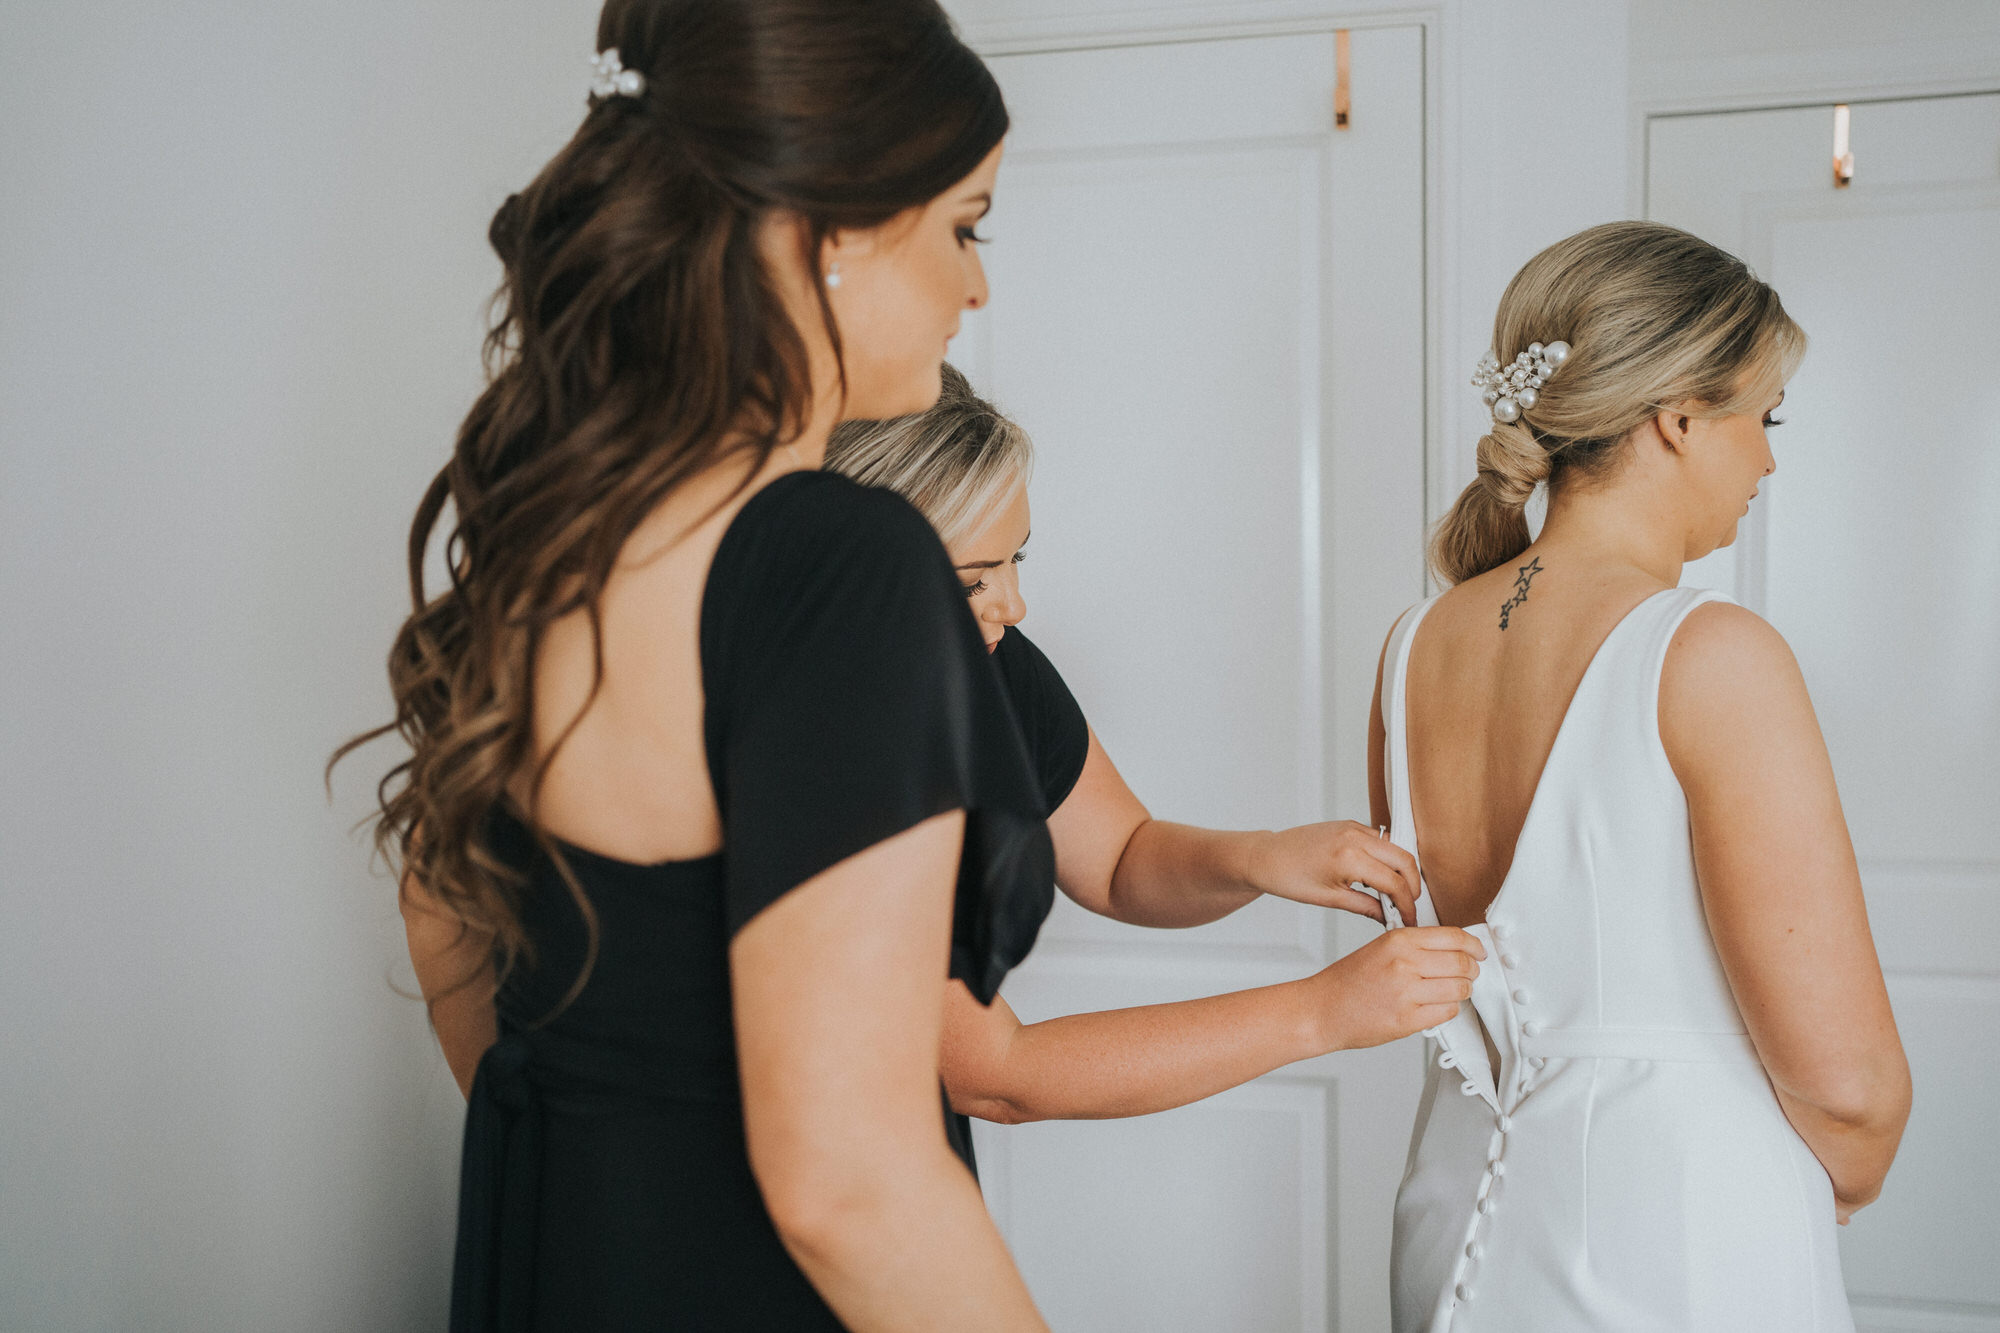 The bride has her dress fixed by her bridesmaids